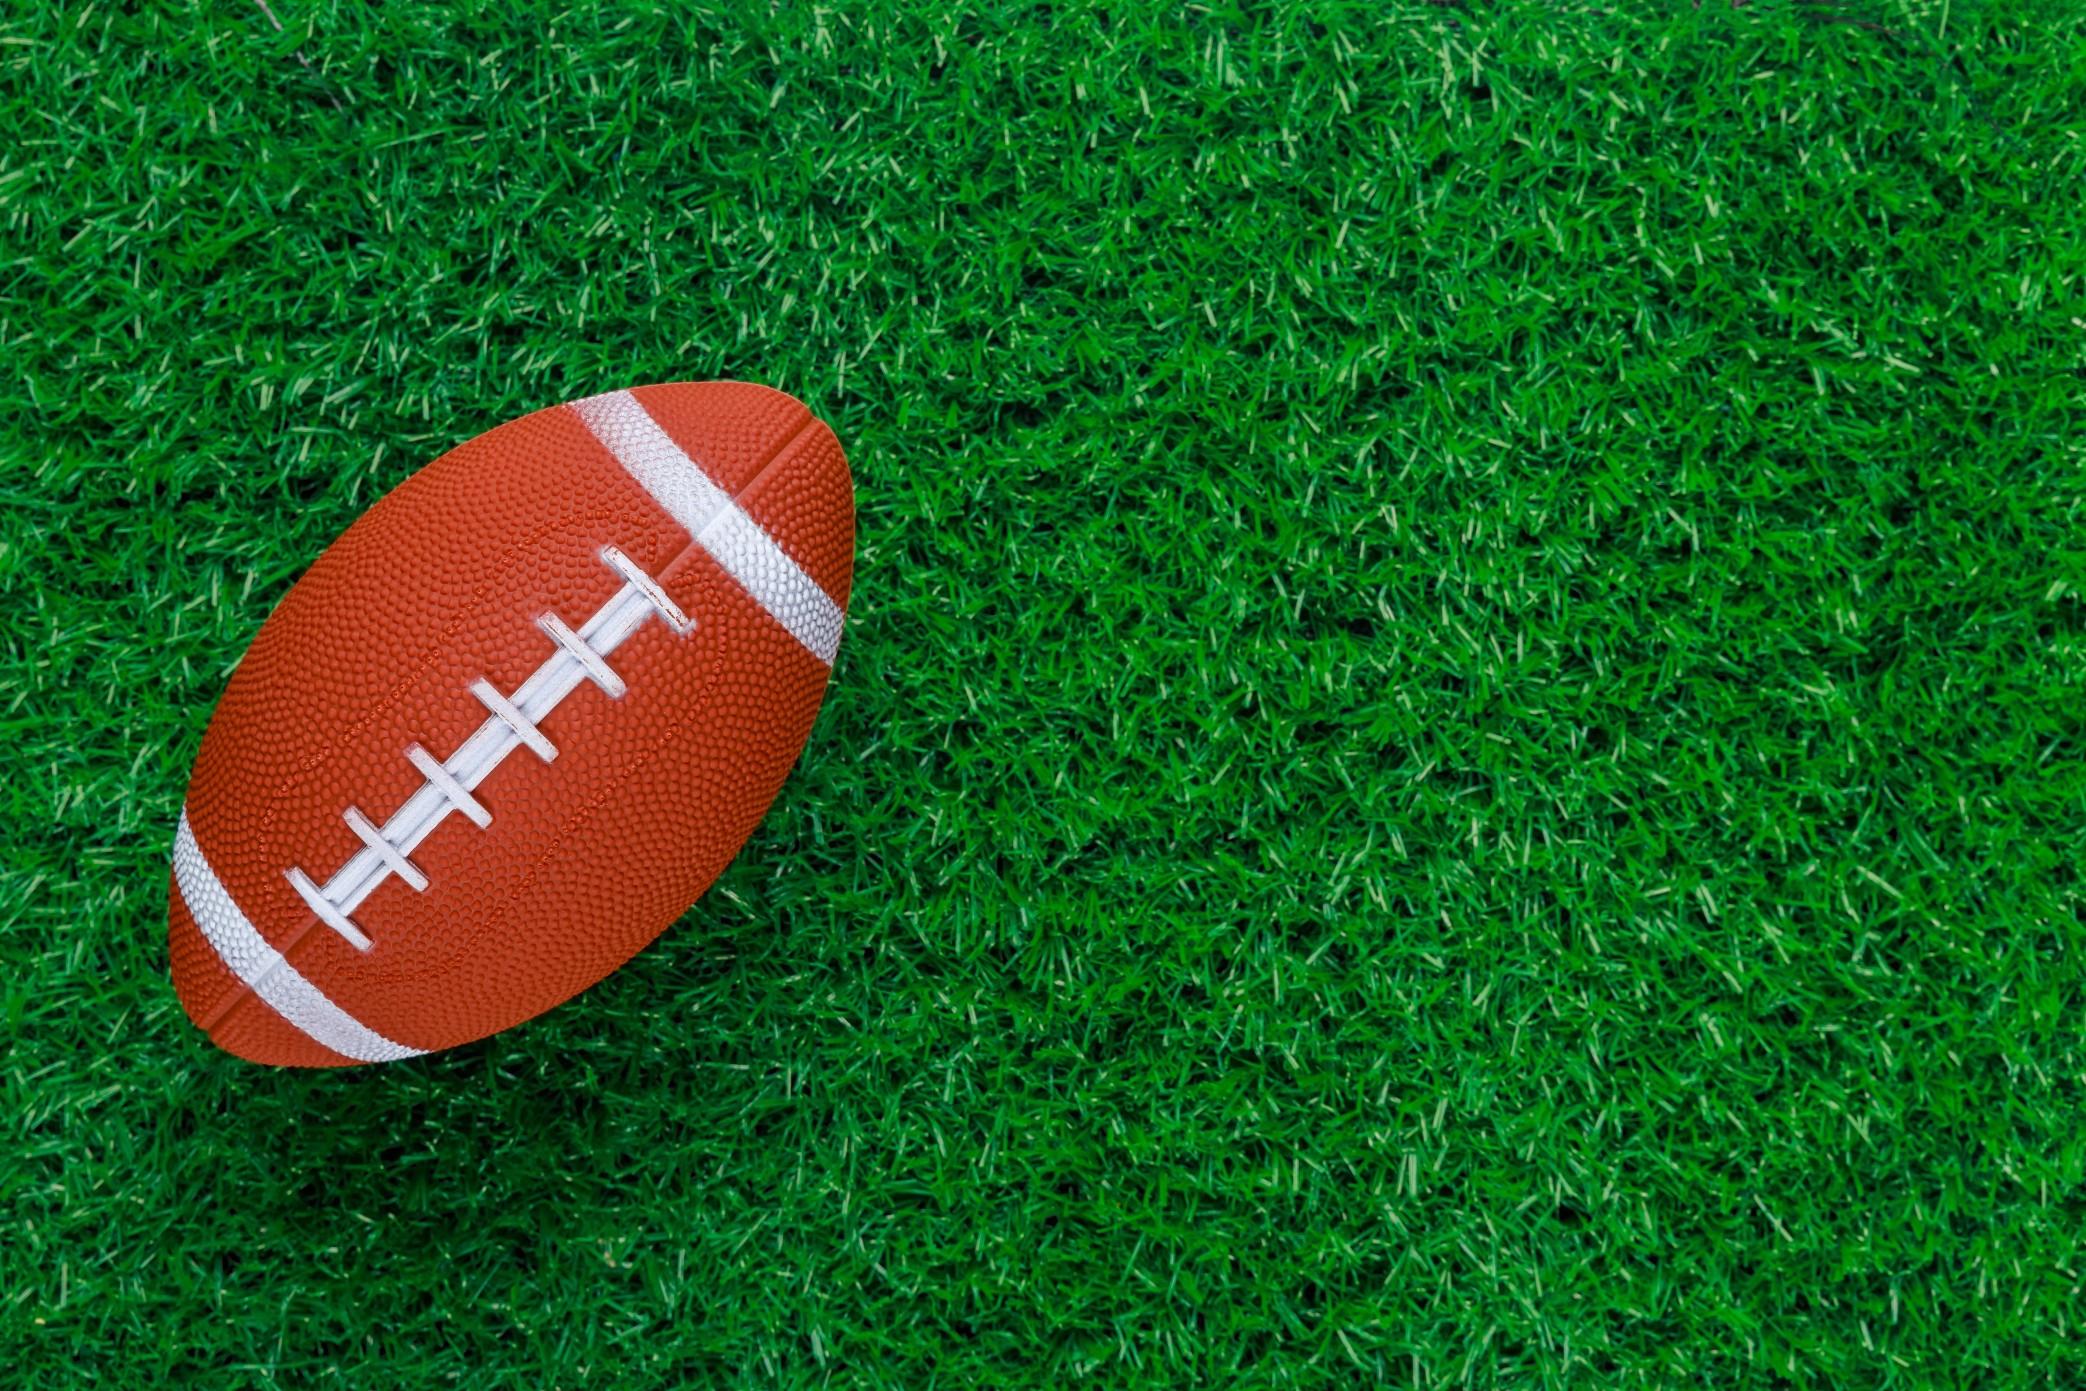 A football in the grass